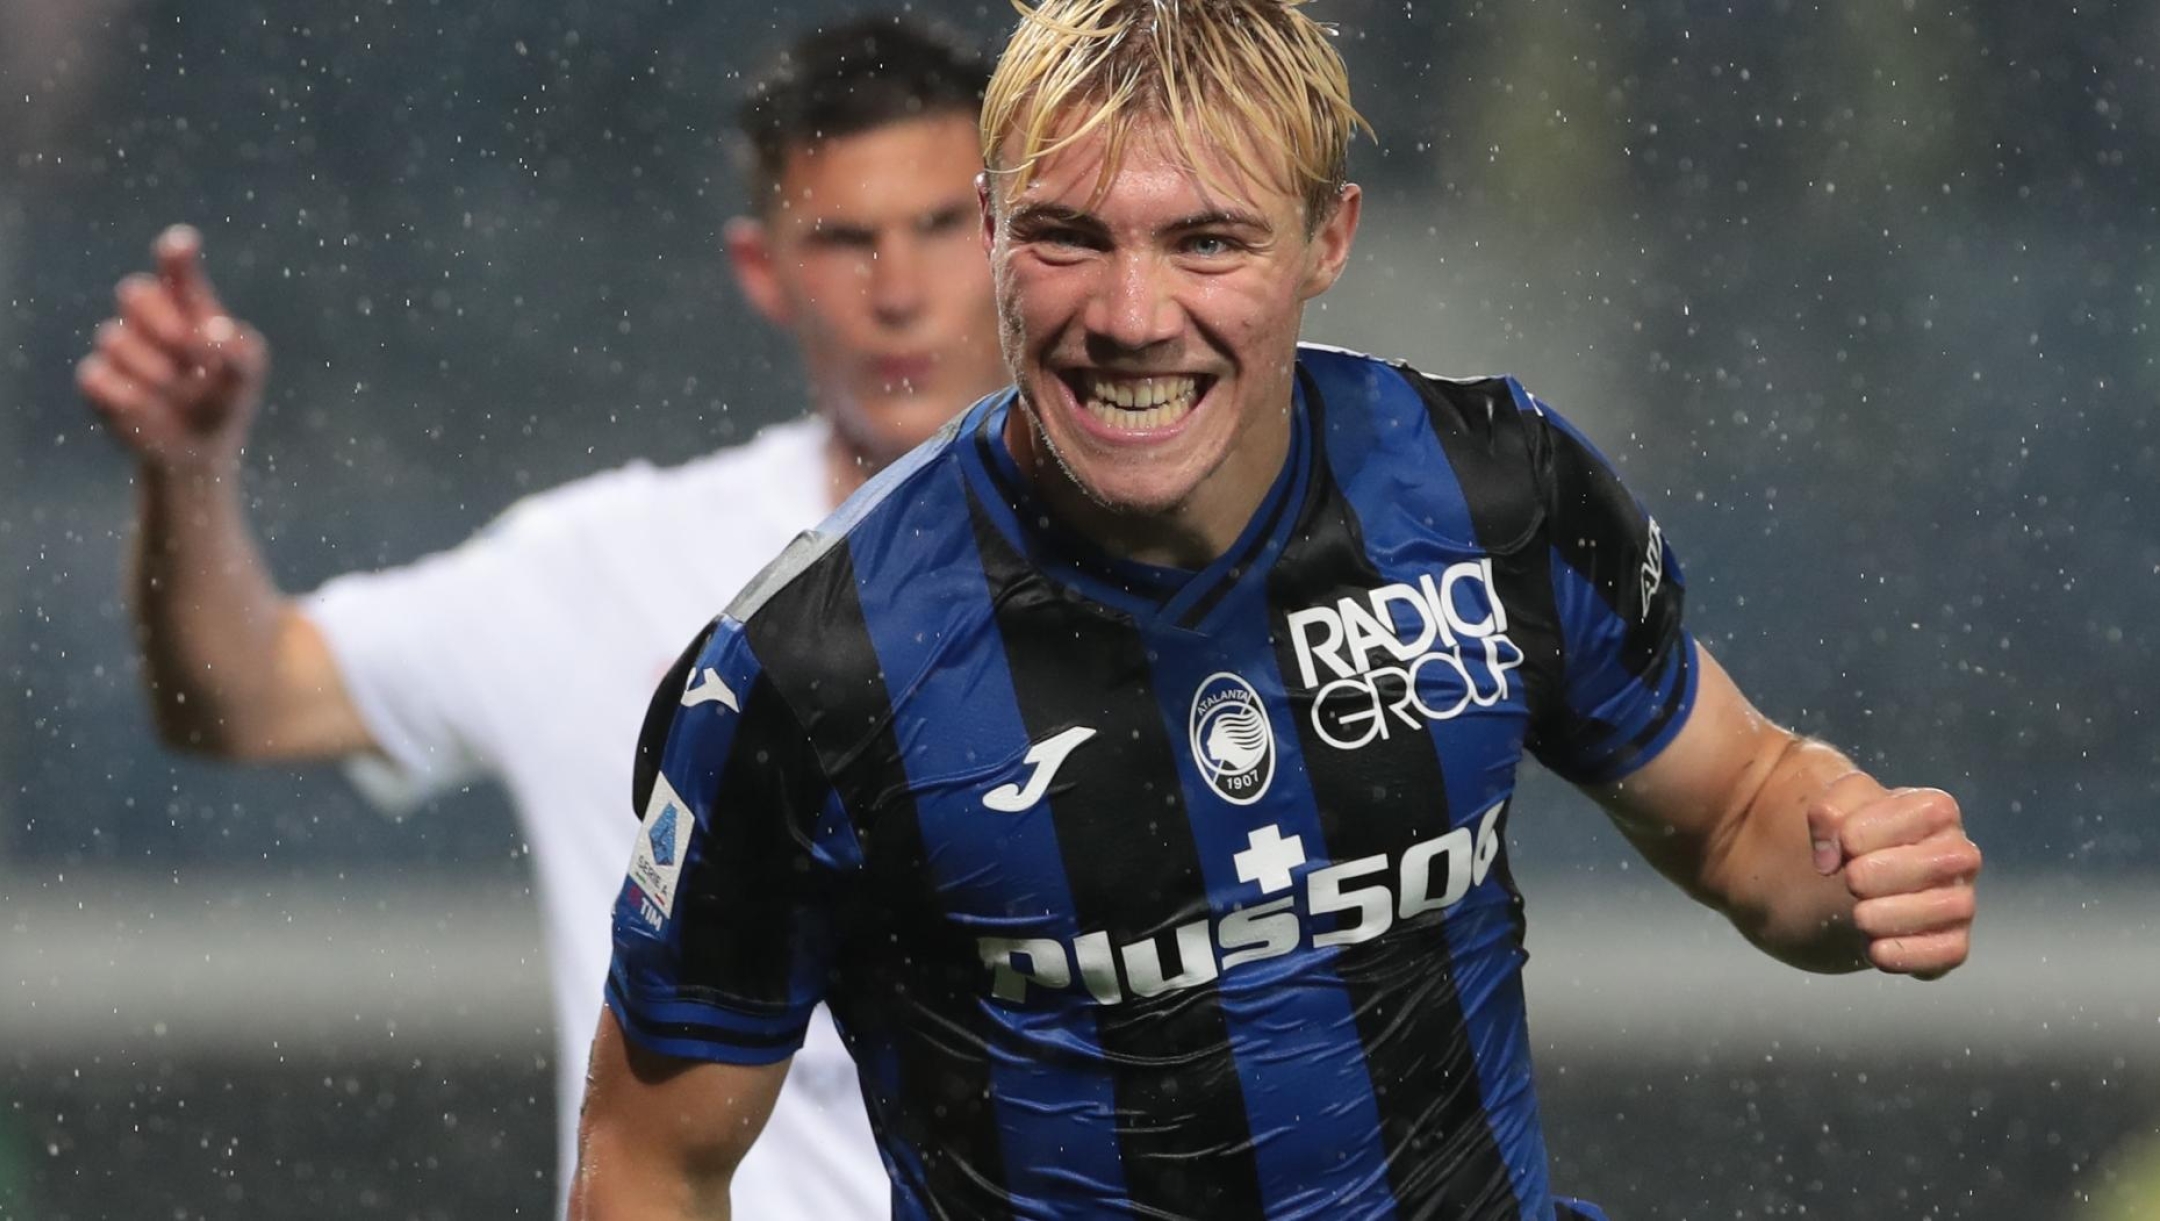 BERGAMO, ITALY - JUNE 04: Rasmus Hojlund of Atalanta BC celebrates after scoring the team's third goal during the Serie A match between Atalanta BC and AC Monza at Gewiss Stadium on June 04, 2023 in Bergamo, Italy. (Photo by Emilio Andreoli/Getty Images)